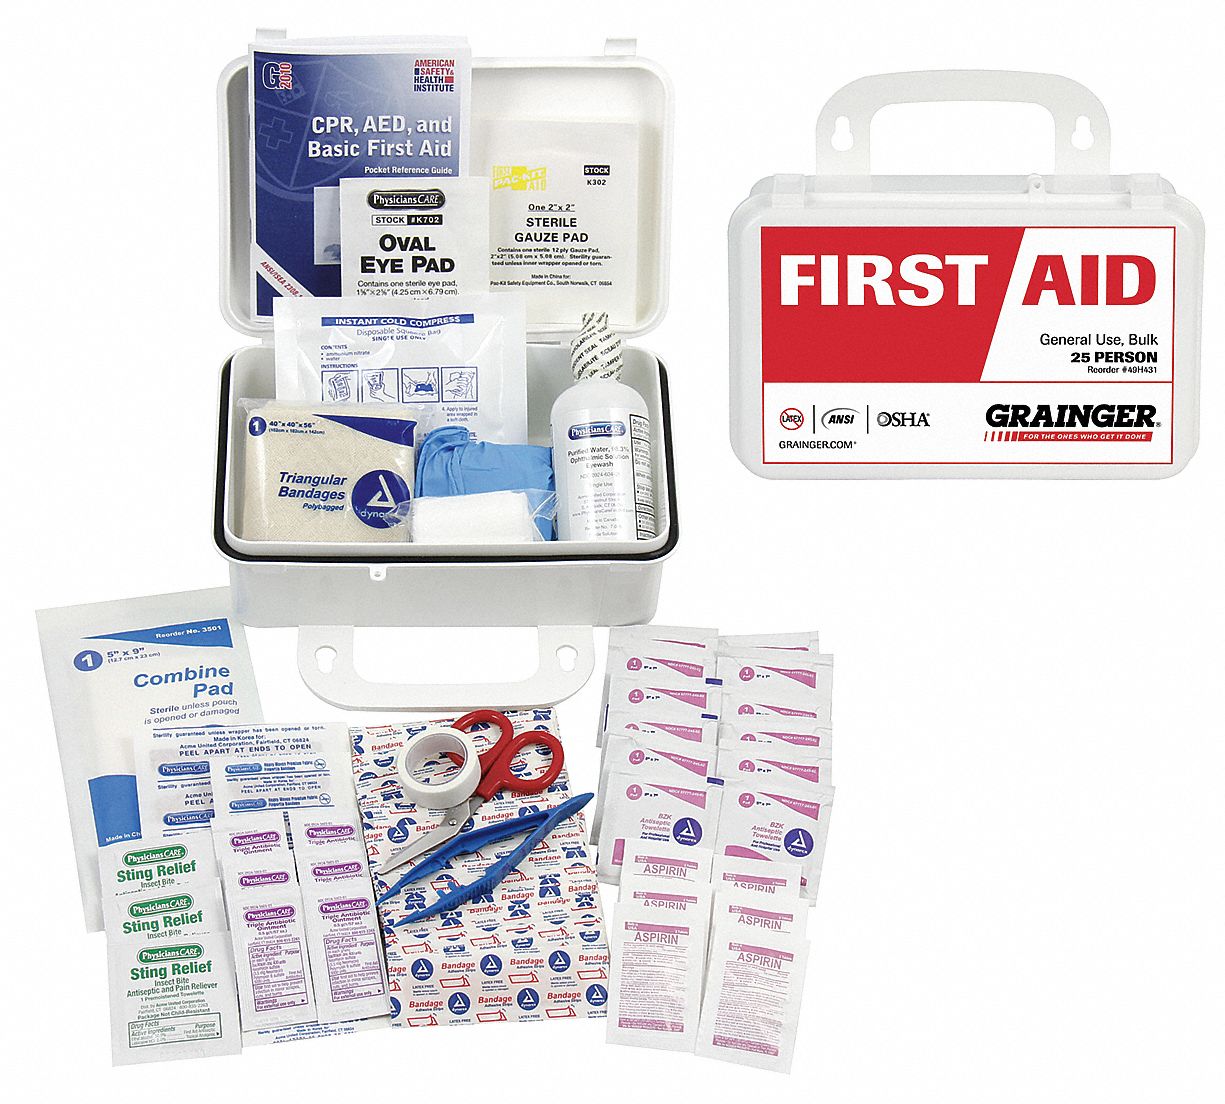 Extra Large Industrial First Aid Kit